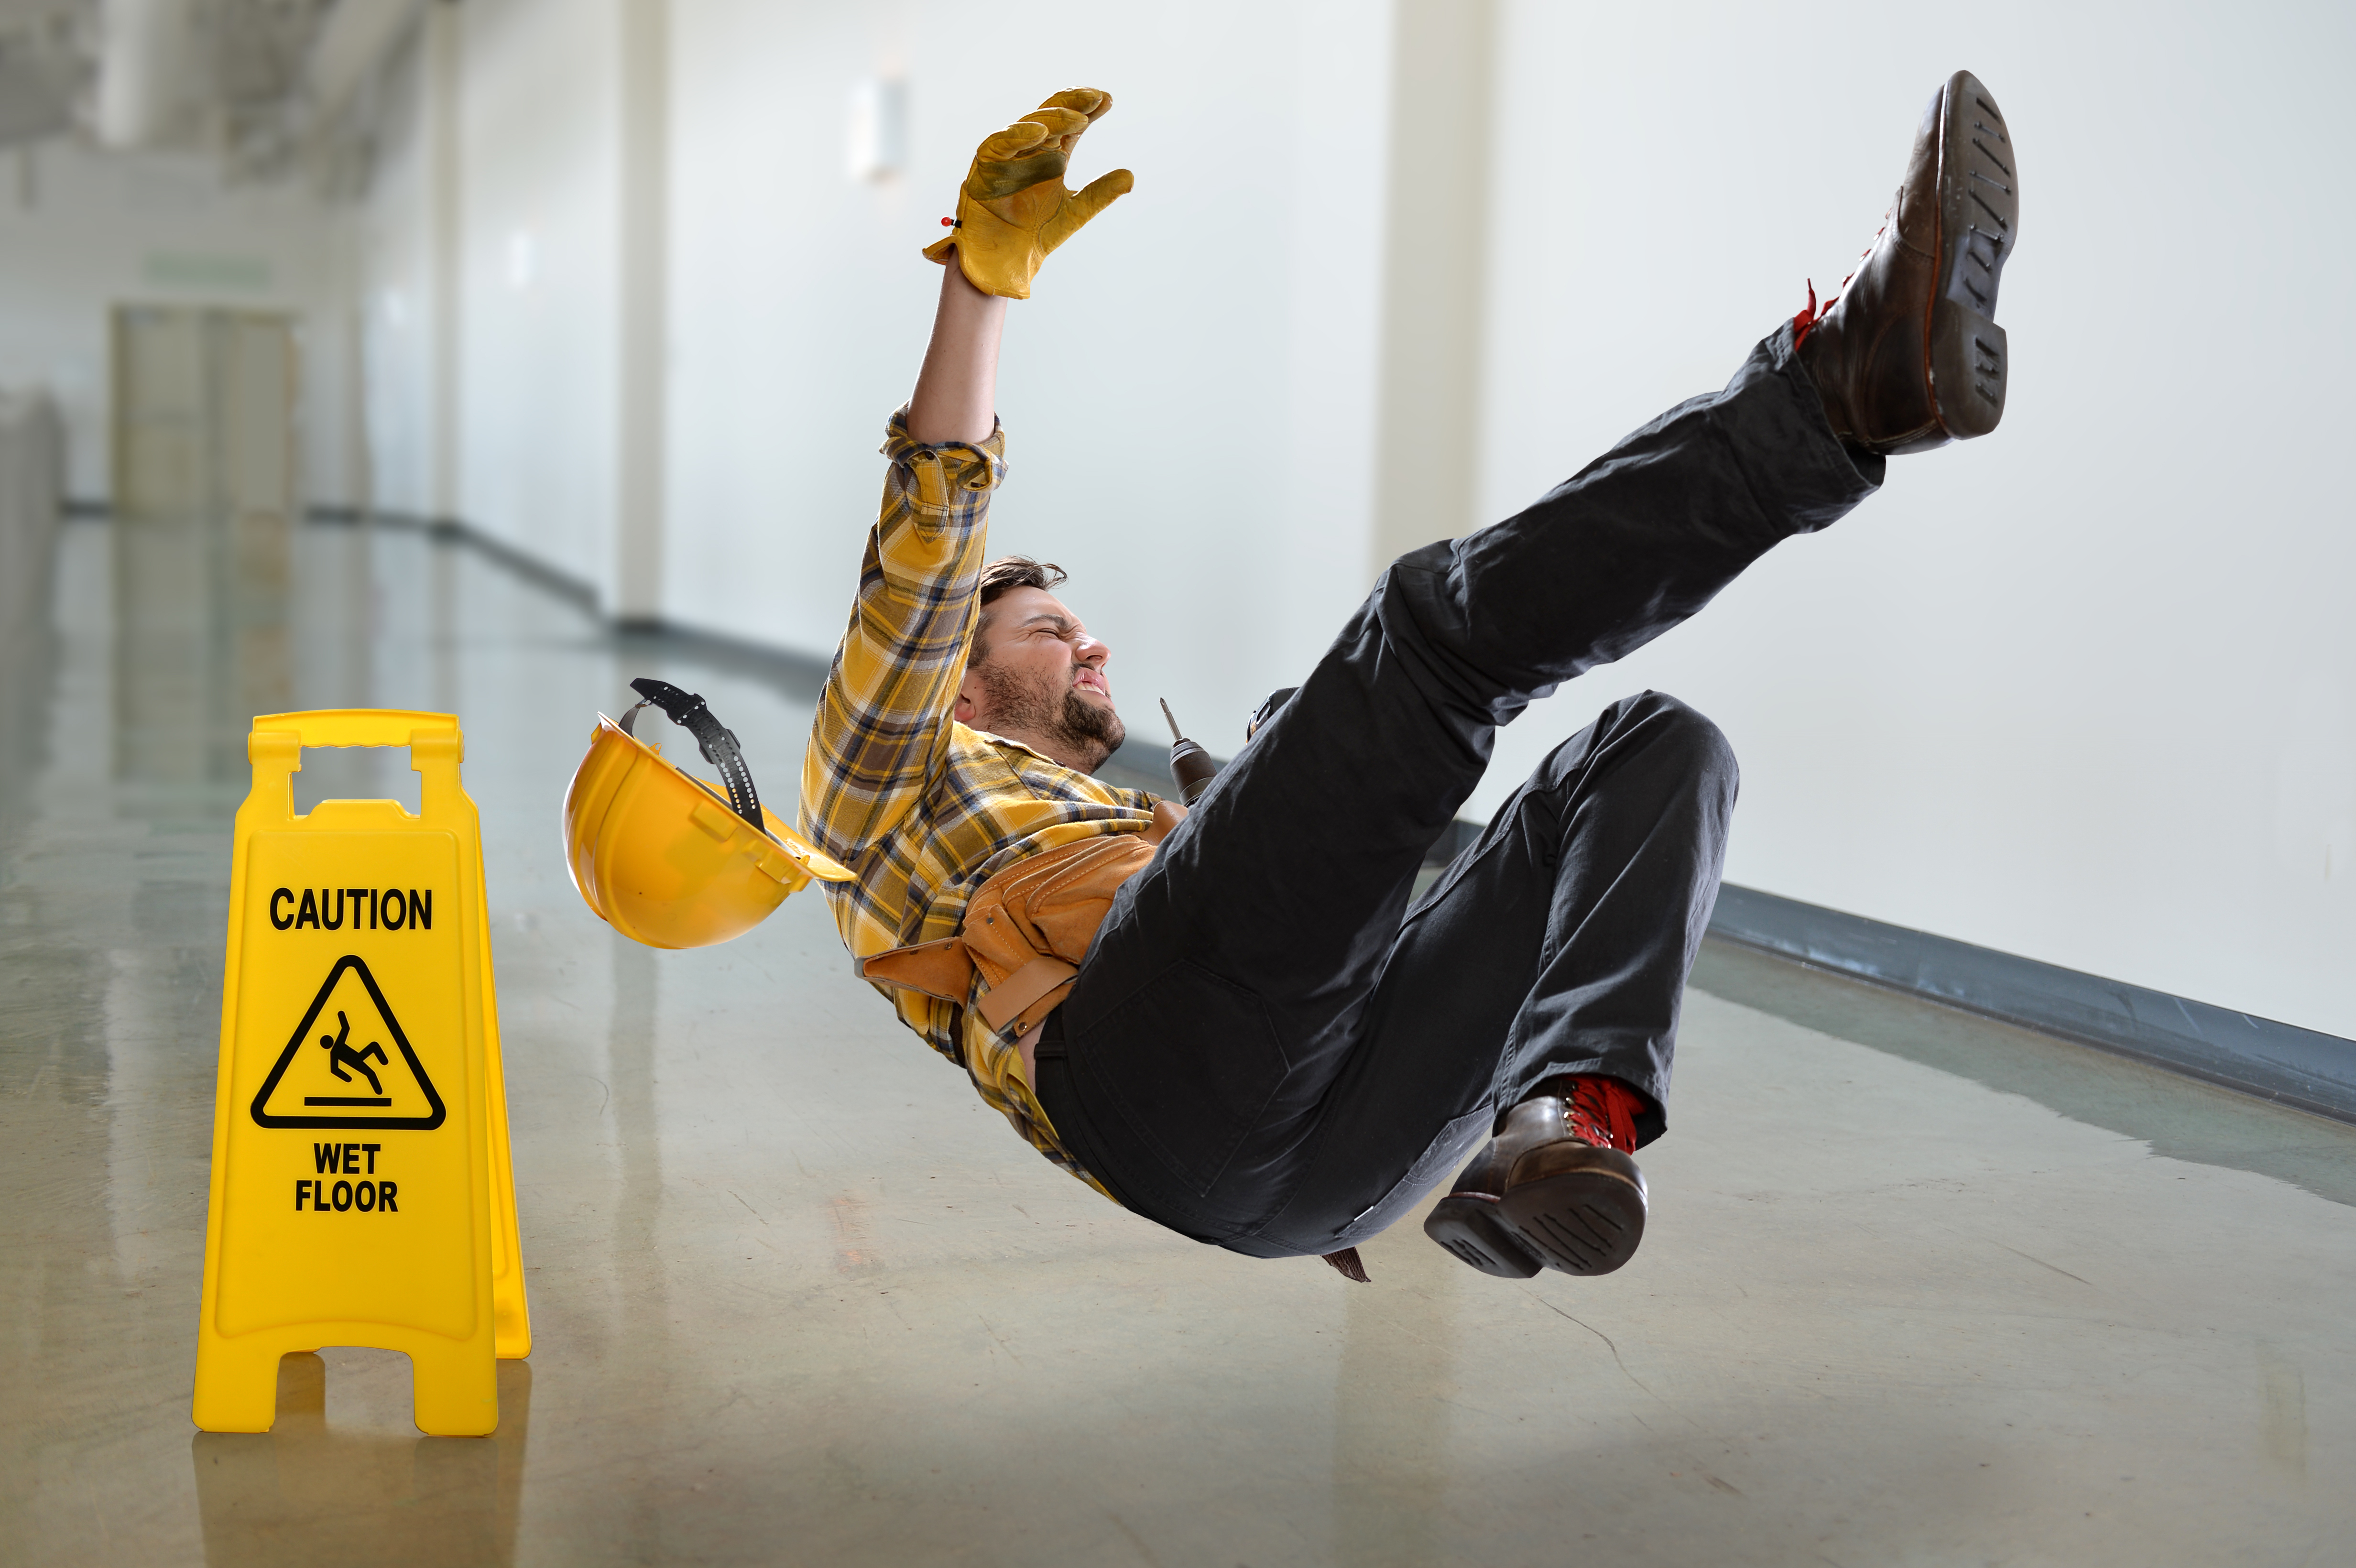 Slip and Fall Accidents: When Can You Hold a Property Owner Liable